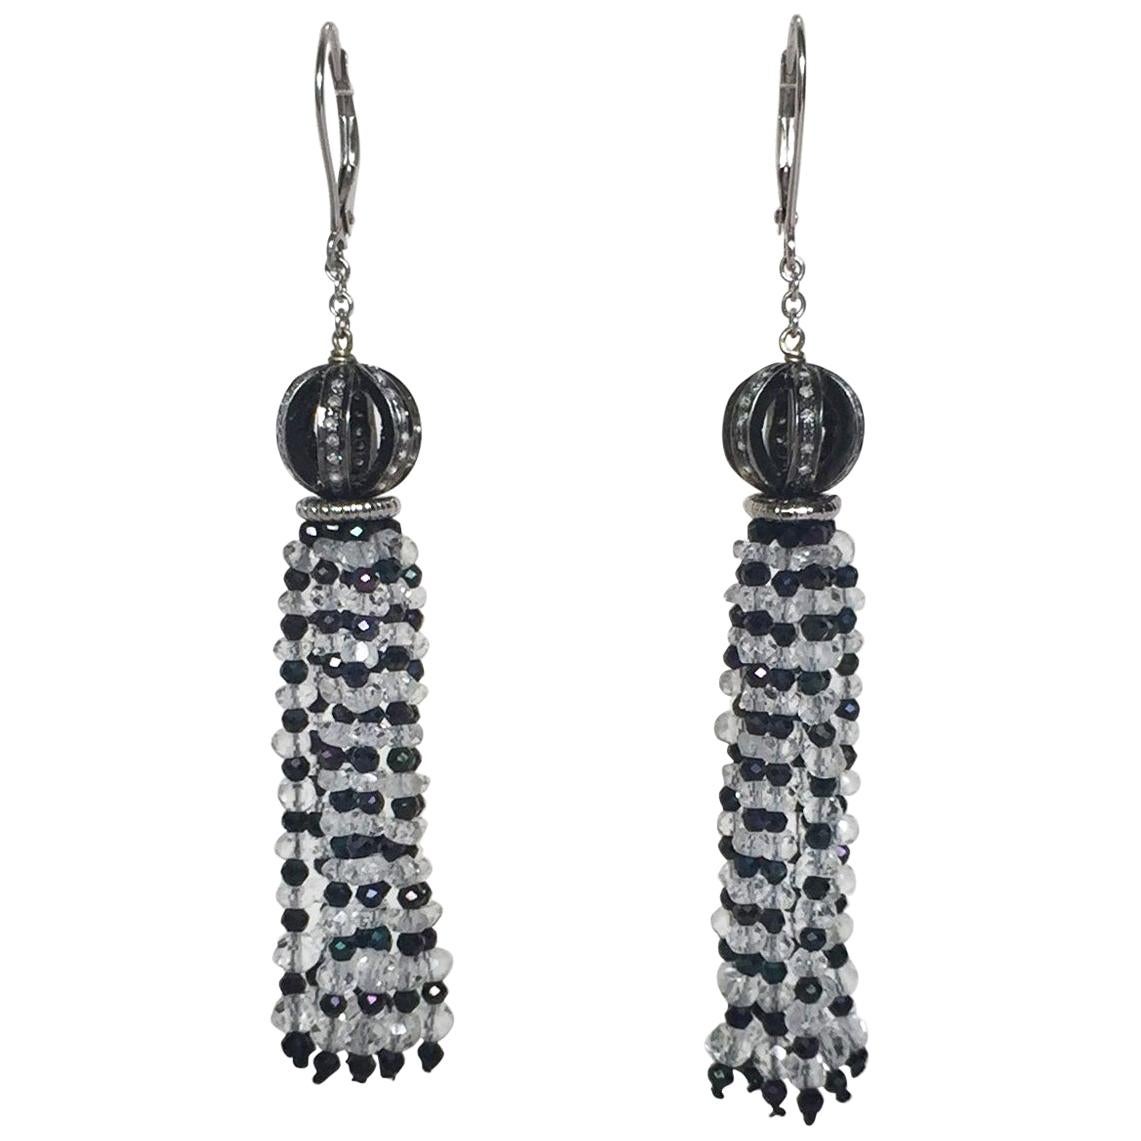 Marina J Diamond Encrusted Ball Earrings with Quartz and Black Spinel Tassels For Sale